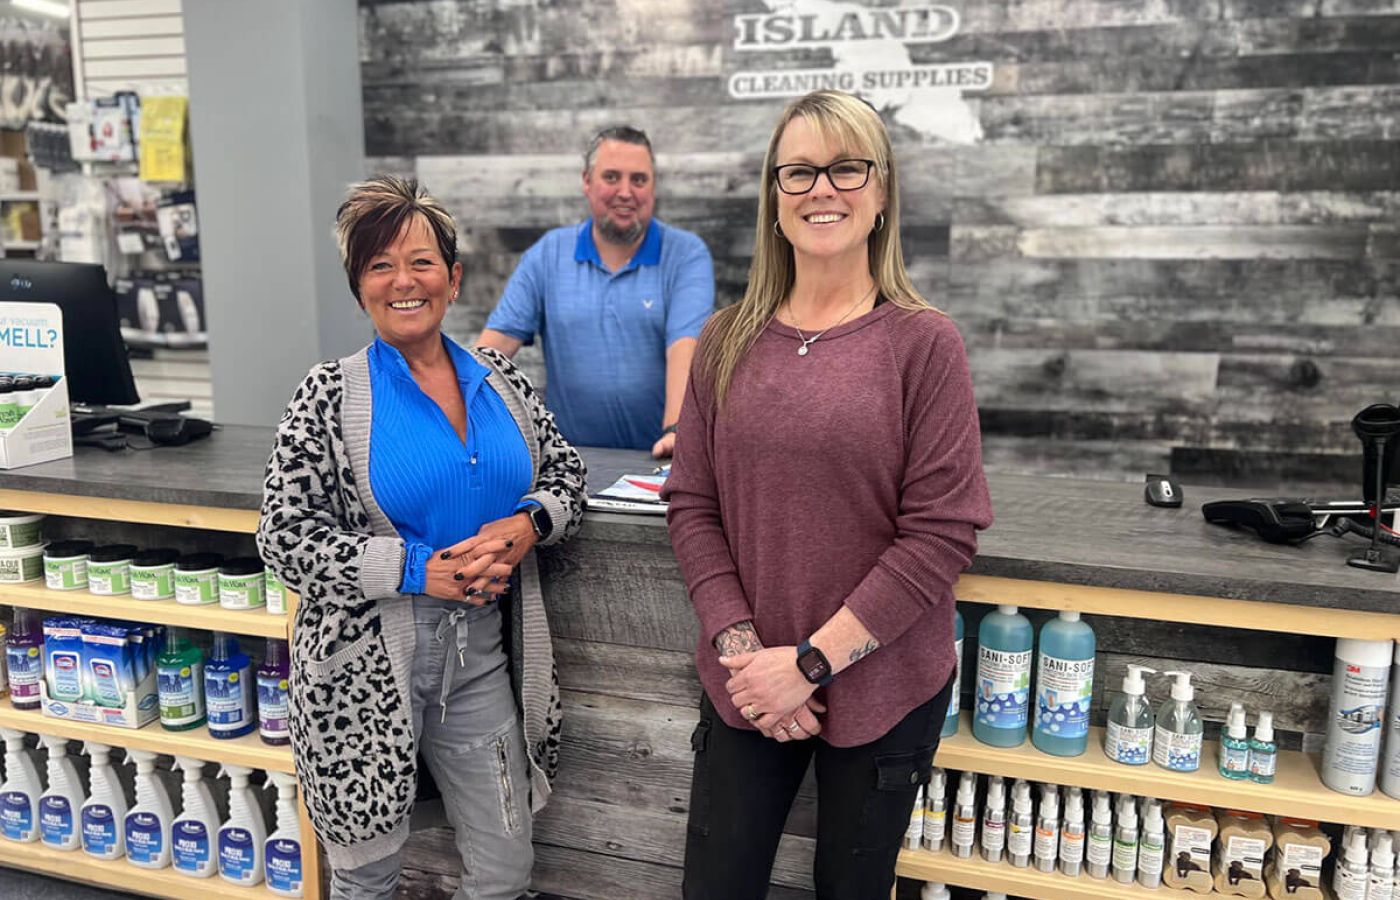 Staff of Island Cleaning Supplies standing in front of counter, smiling